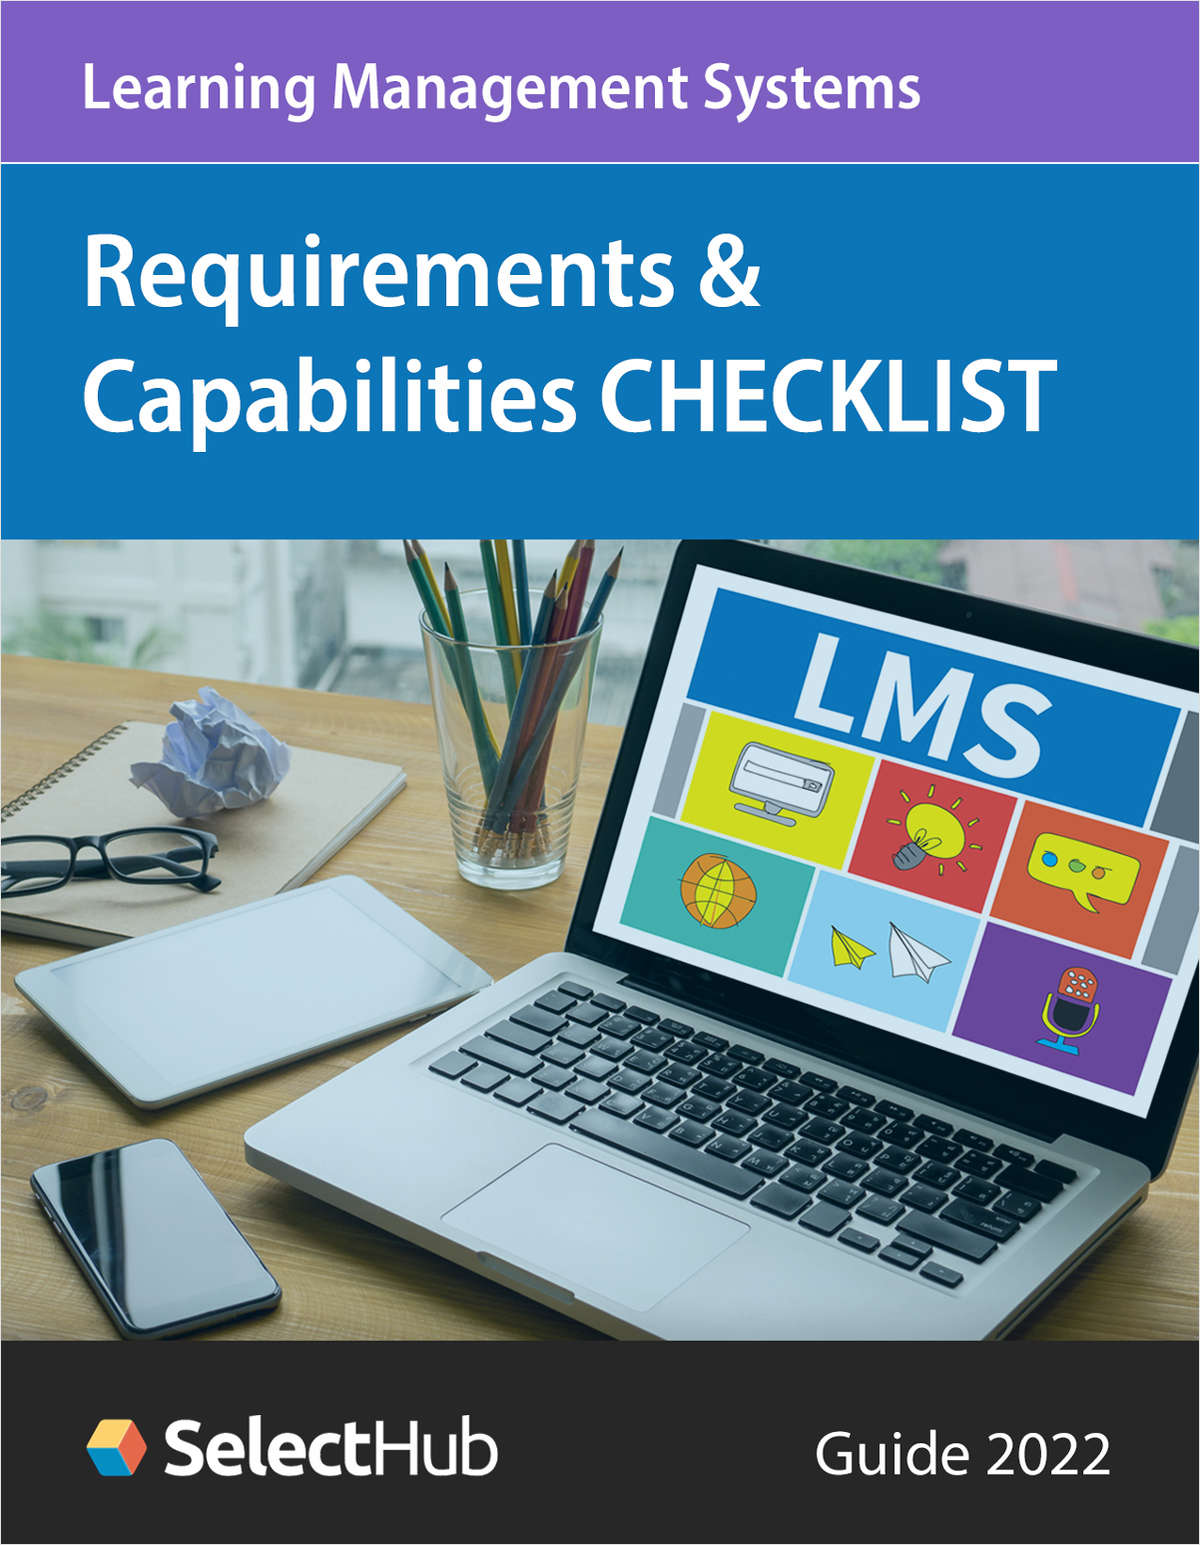 Buying New LMS Software? Get this Expert Requirements and Capabilities Checklist